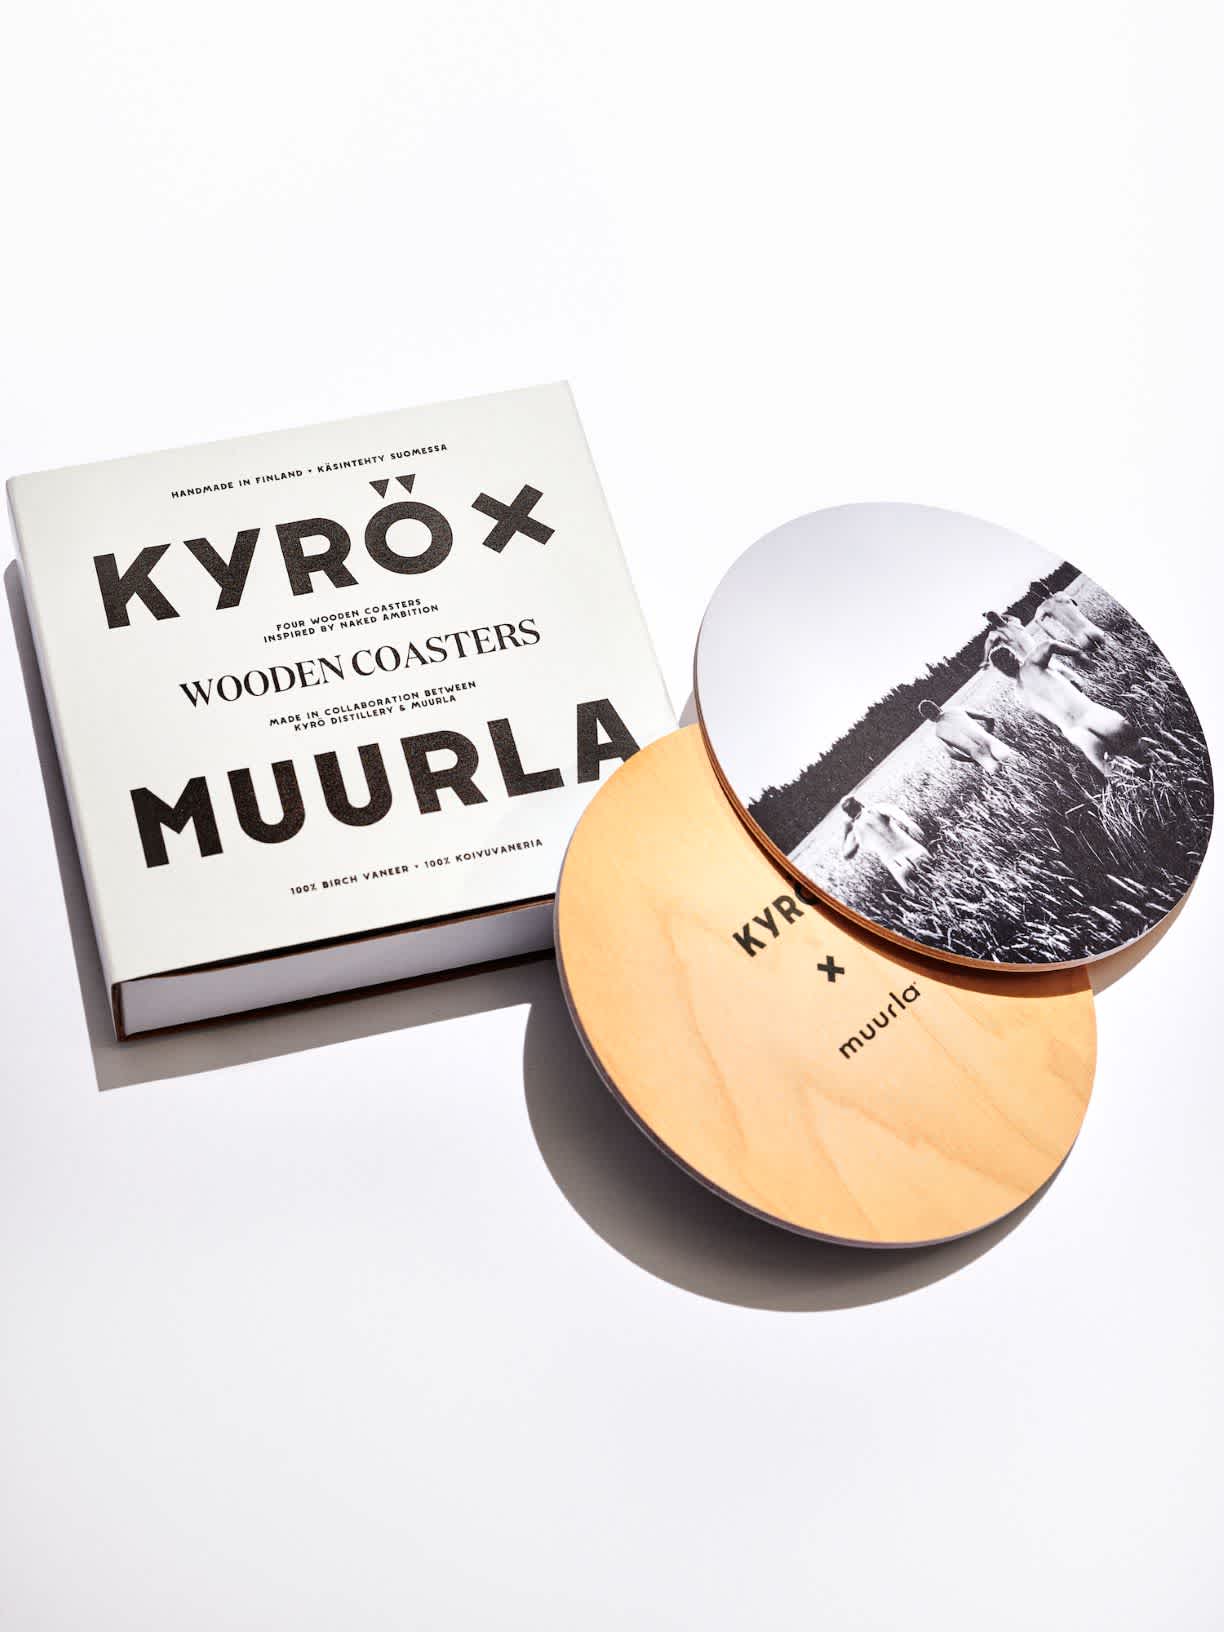 Four pieces of Muurla x Kyrö coaster from birch veneer, with a running naked picture and Kyrö Distillery Company logo. 